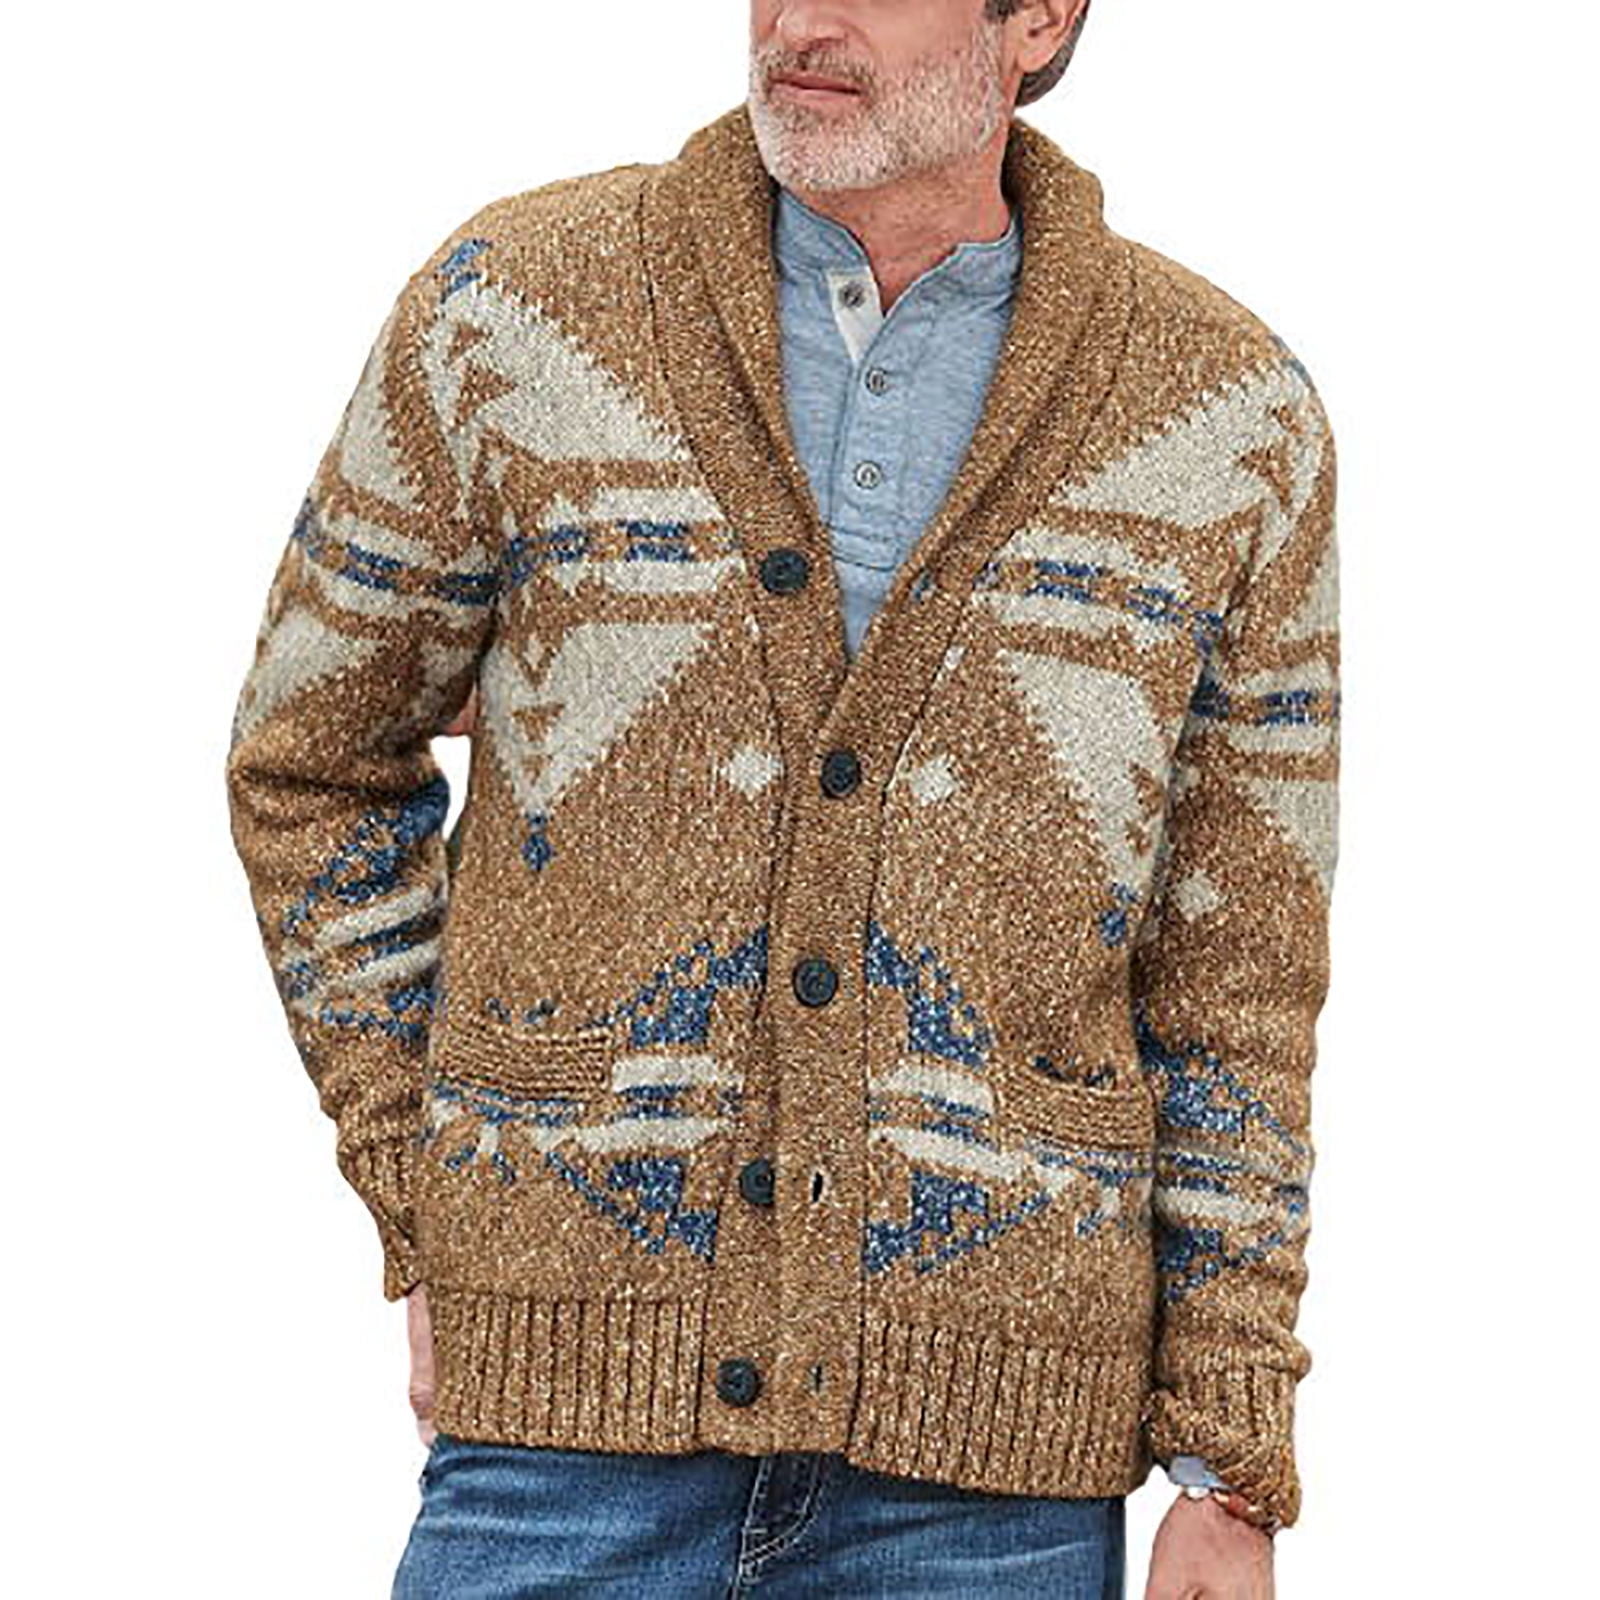 Men's Western Ethnic Aztec Cardigan Sweater Retro Shawl Collar Button Up  Knitwear Coat with Pockets